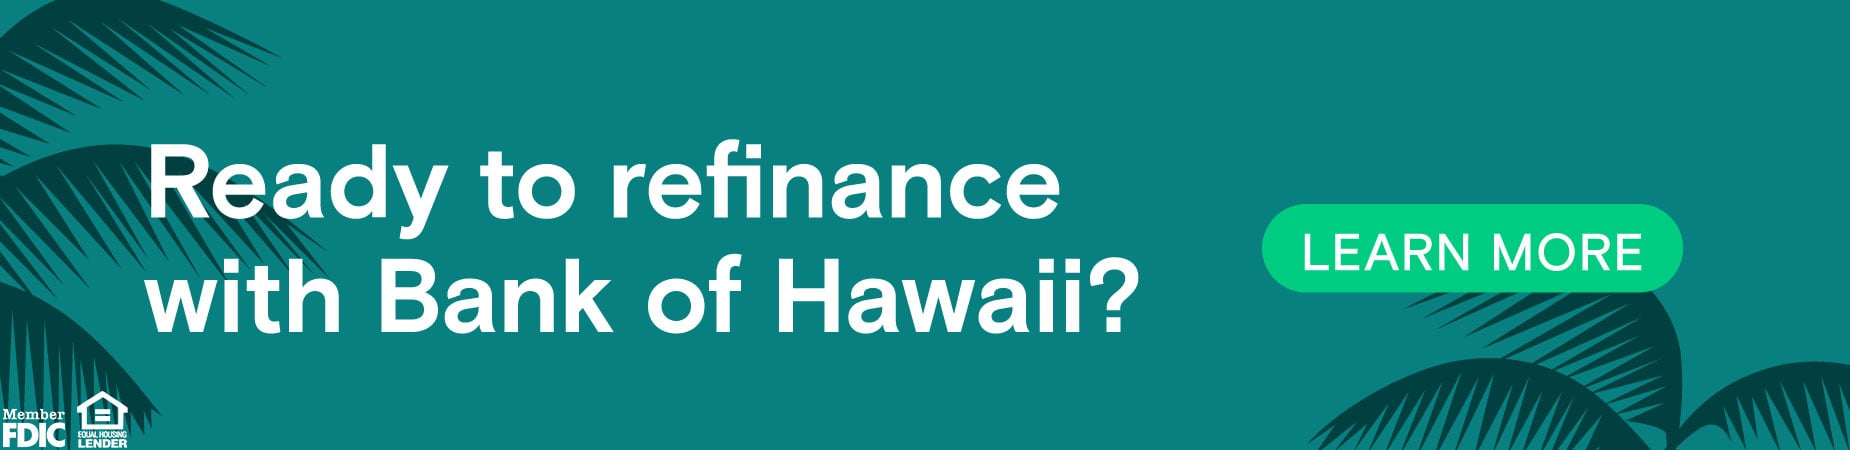 Ready to refinance with Bank of Hawaii?